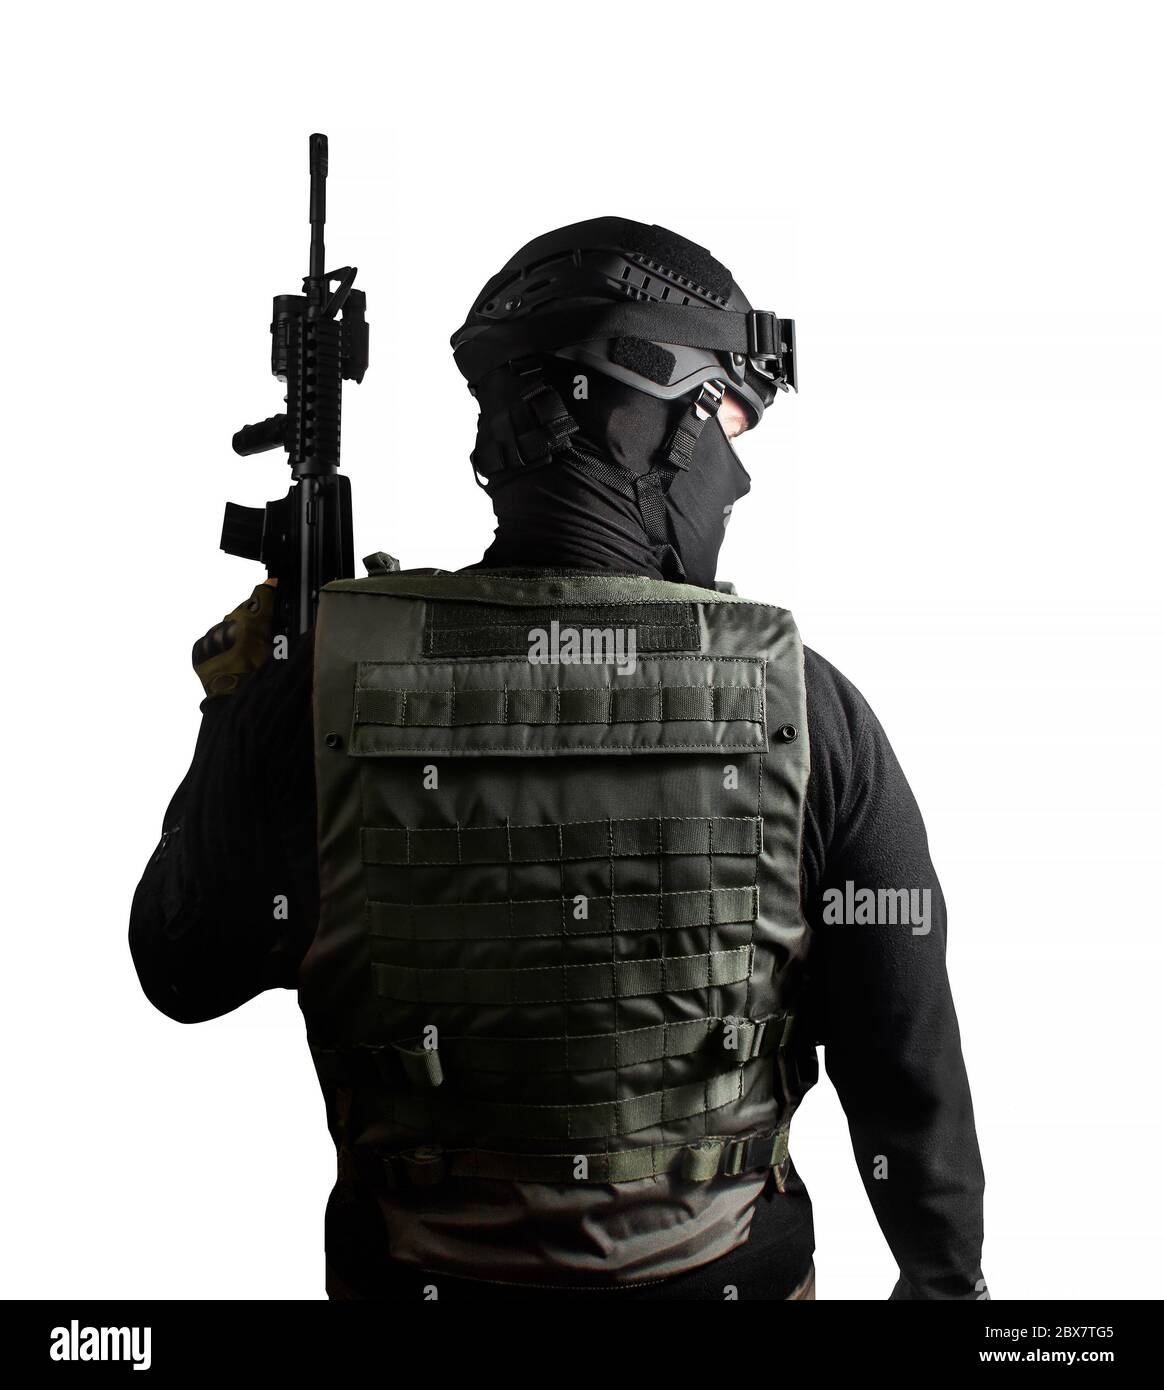 Isolated photo of a fully equipped swat soldier standing with rifle back  view pose Stock Photo - Alamy